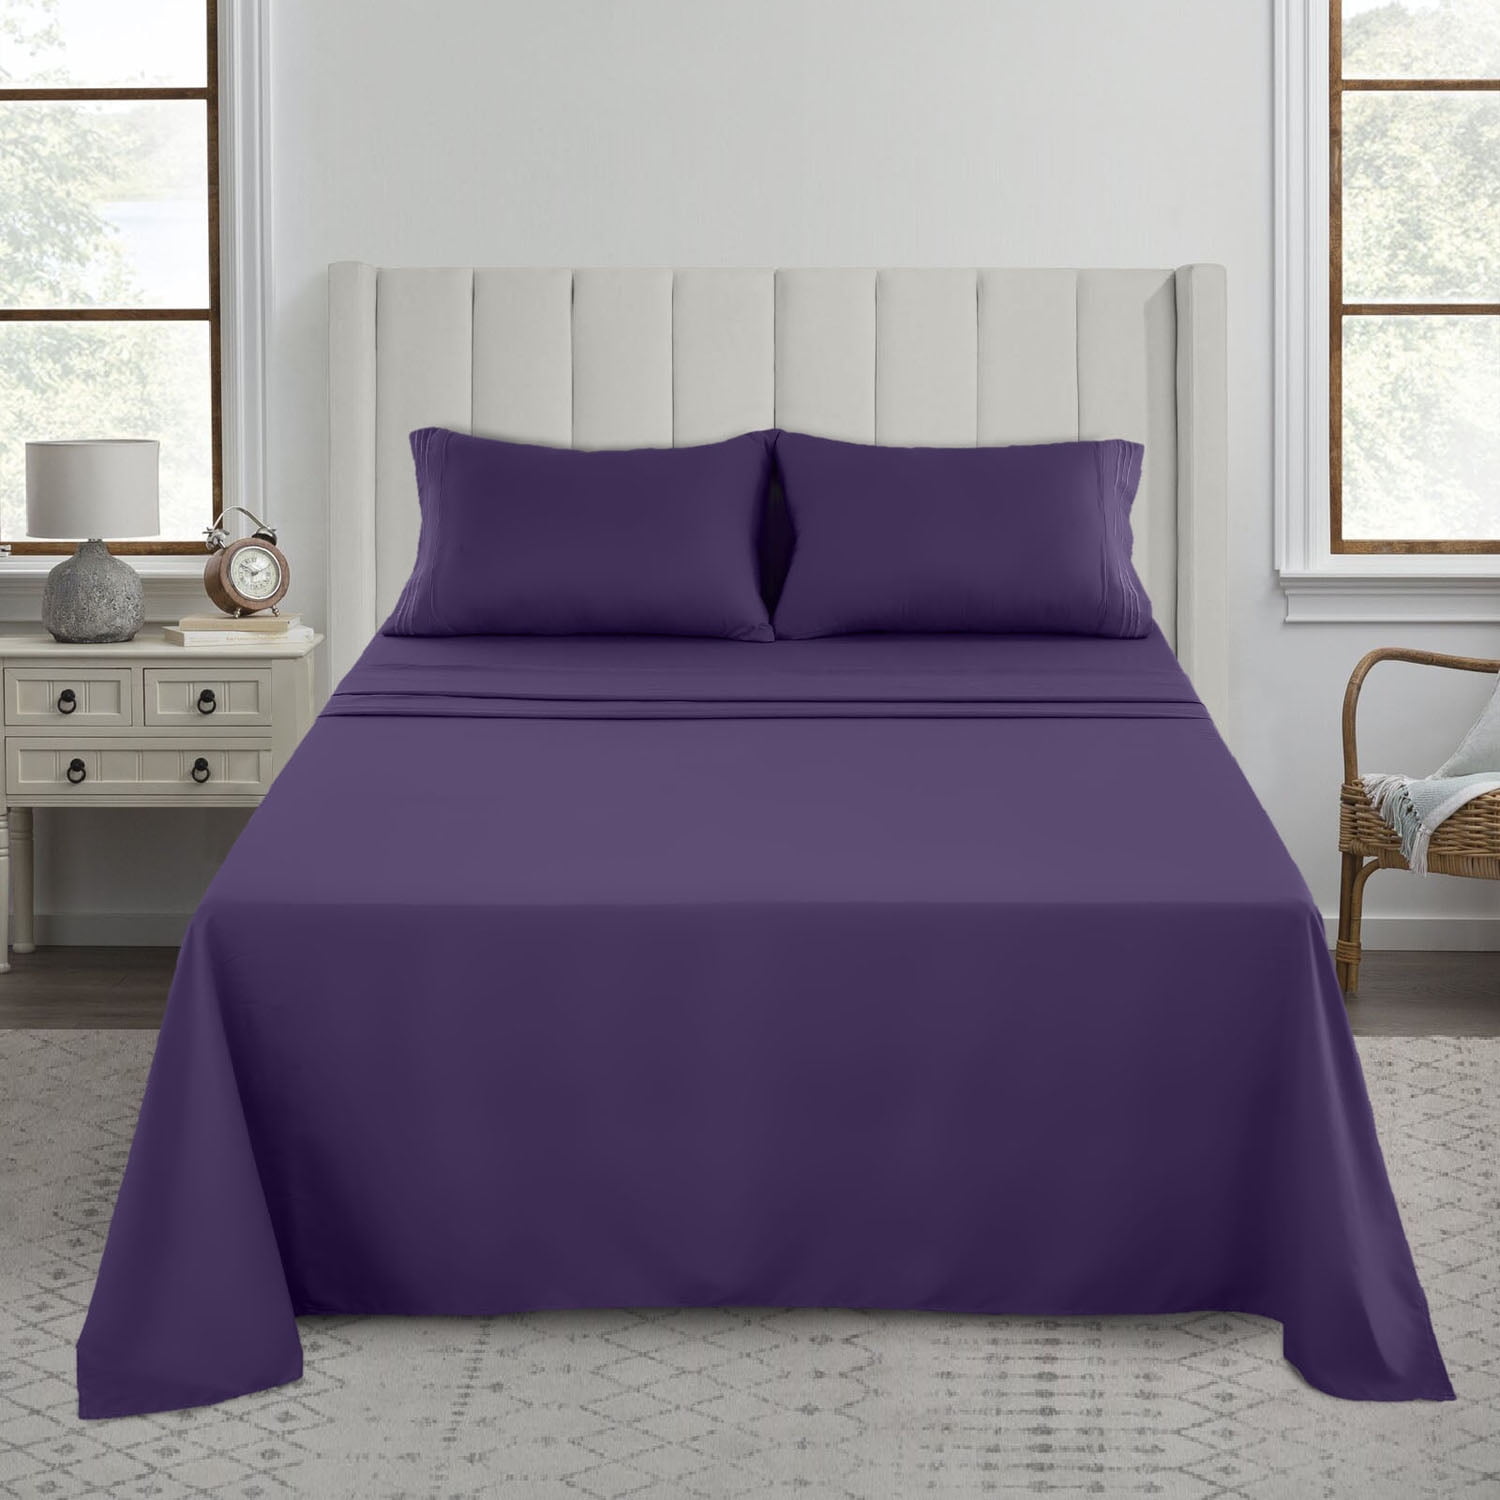 2 Pillowcases Fitted sheet Twin Full Queen Custom Bed Linen Top sheet Cotton Satin Sheets Set of 4 Pieces in Lilac